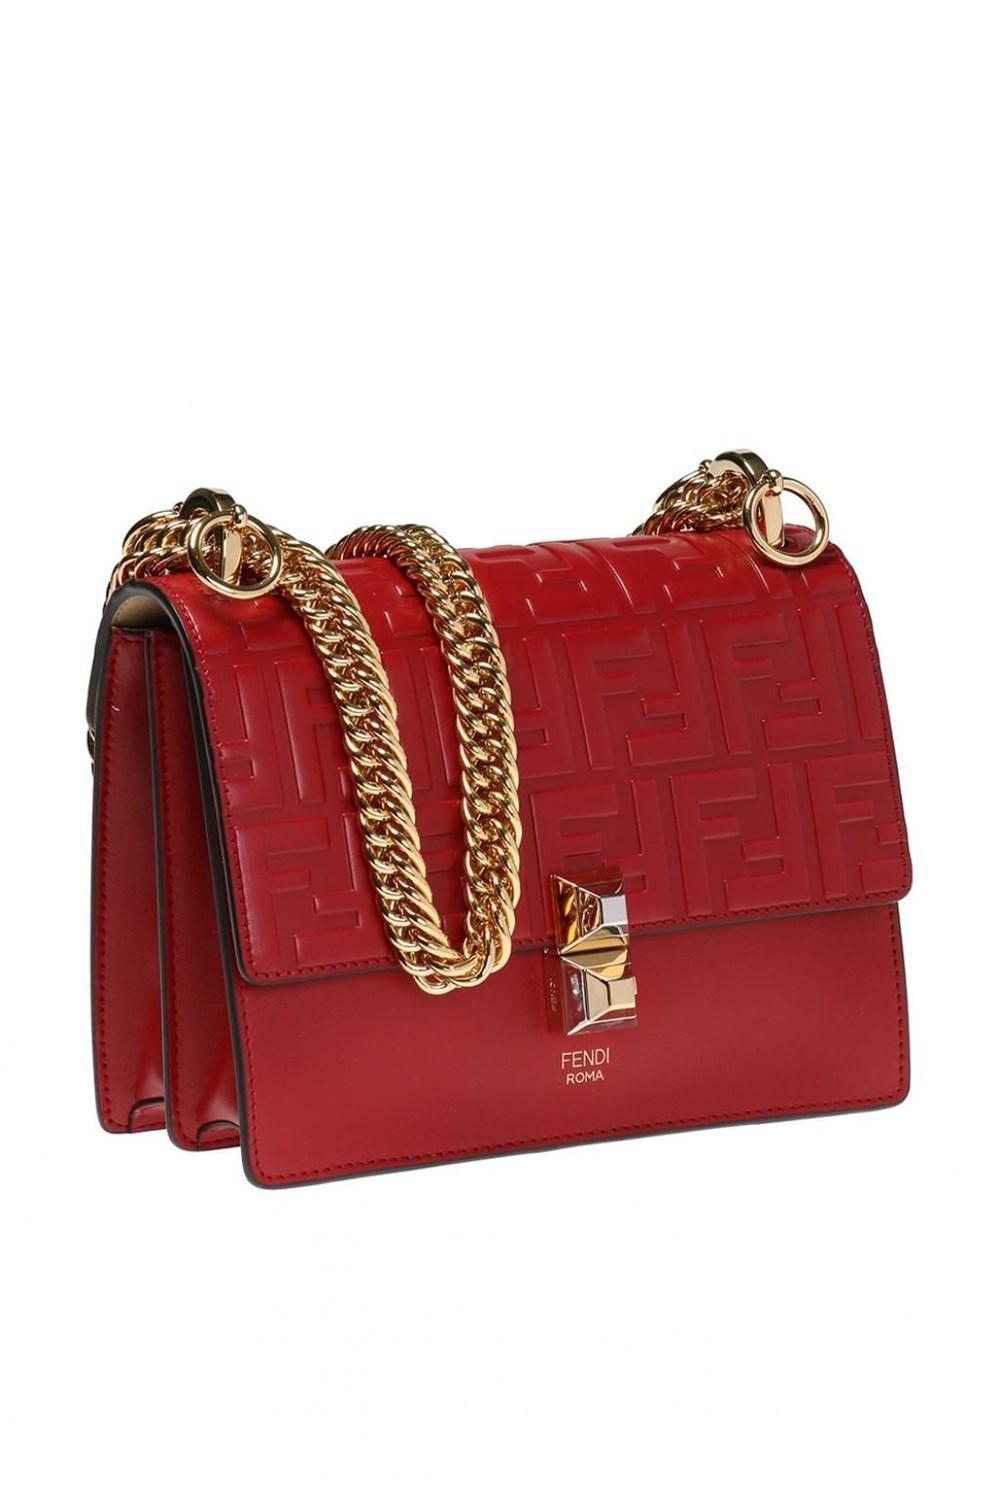 Fendi Women's 8m0381a417f0mvv Red Leather Shoulder Bag in Red - Lyst